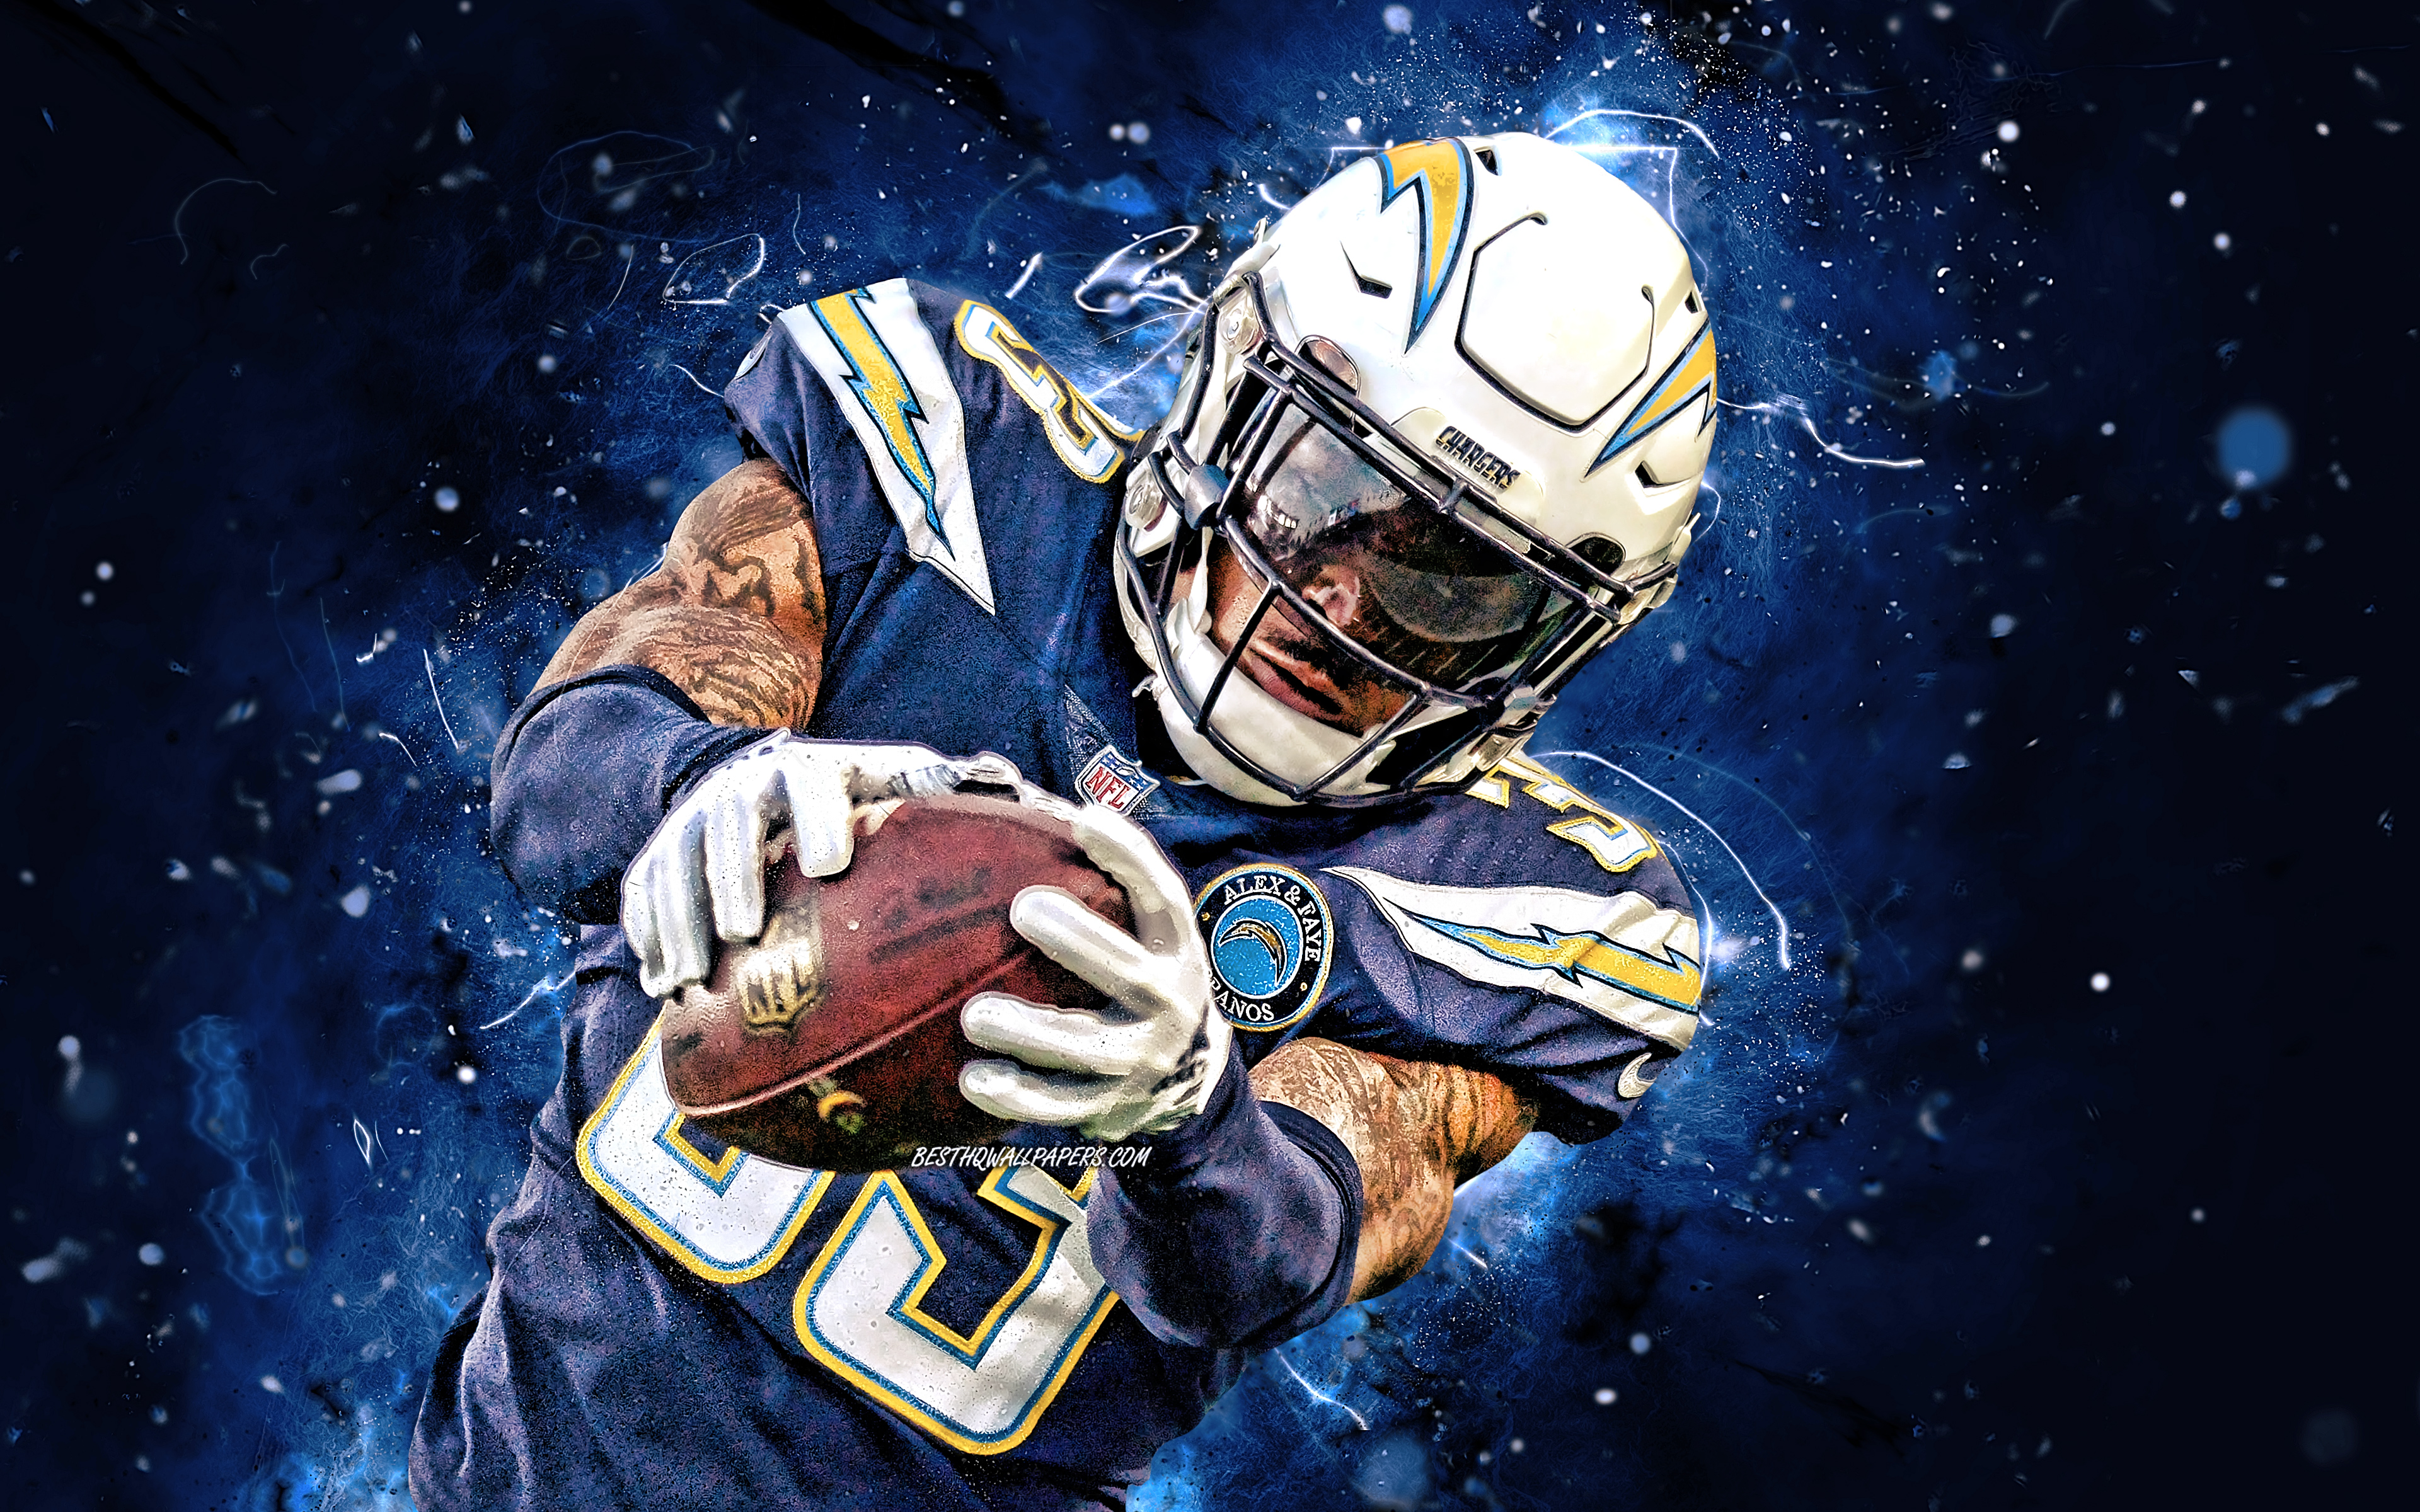 Download wallpaper Derwin James, 4k, NFL, strong safety, Los Angeles Chargers, american football, Derwin Alonzo James Jr, LA Chargers, National Football League, neon lights, Derwin James LA Chargers for desktop with resolution